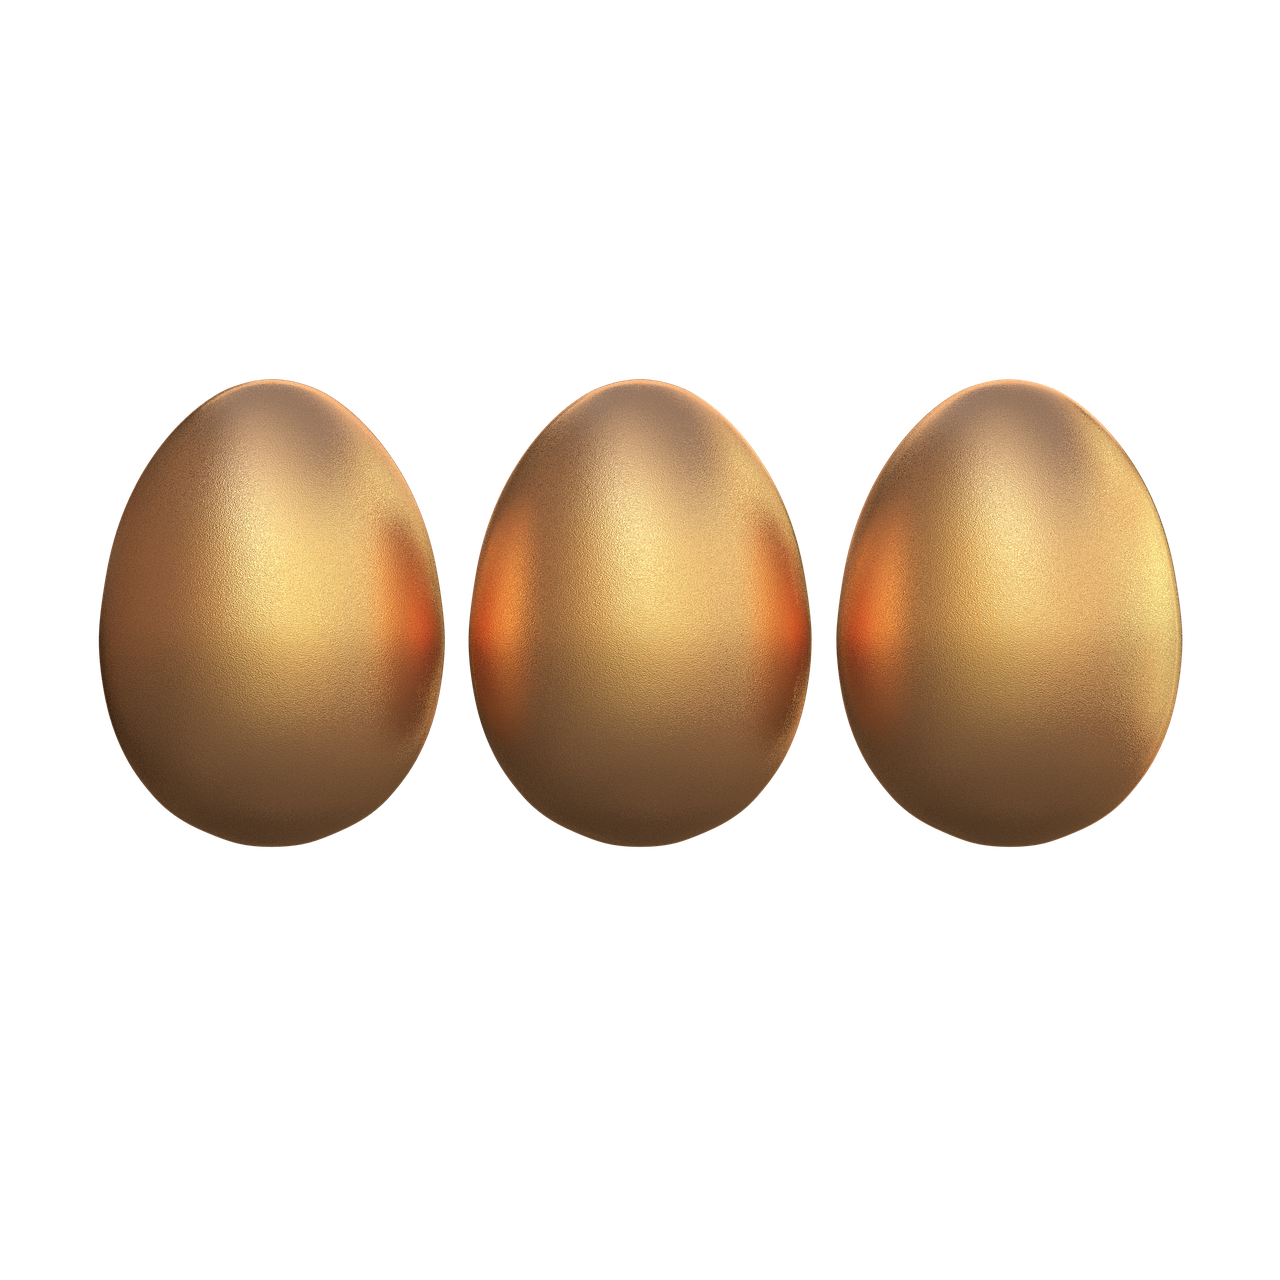 the painted eggs transparent background of chickens free photo